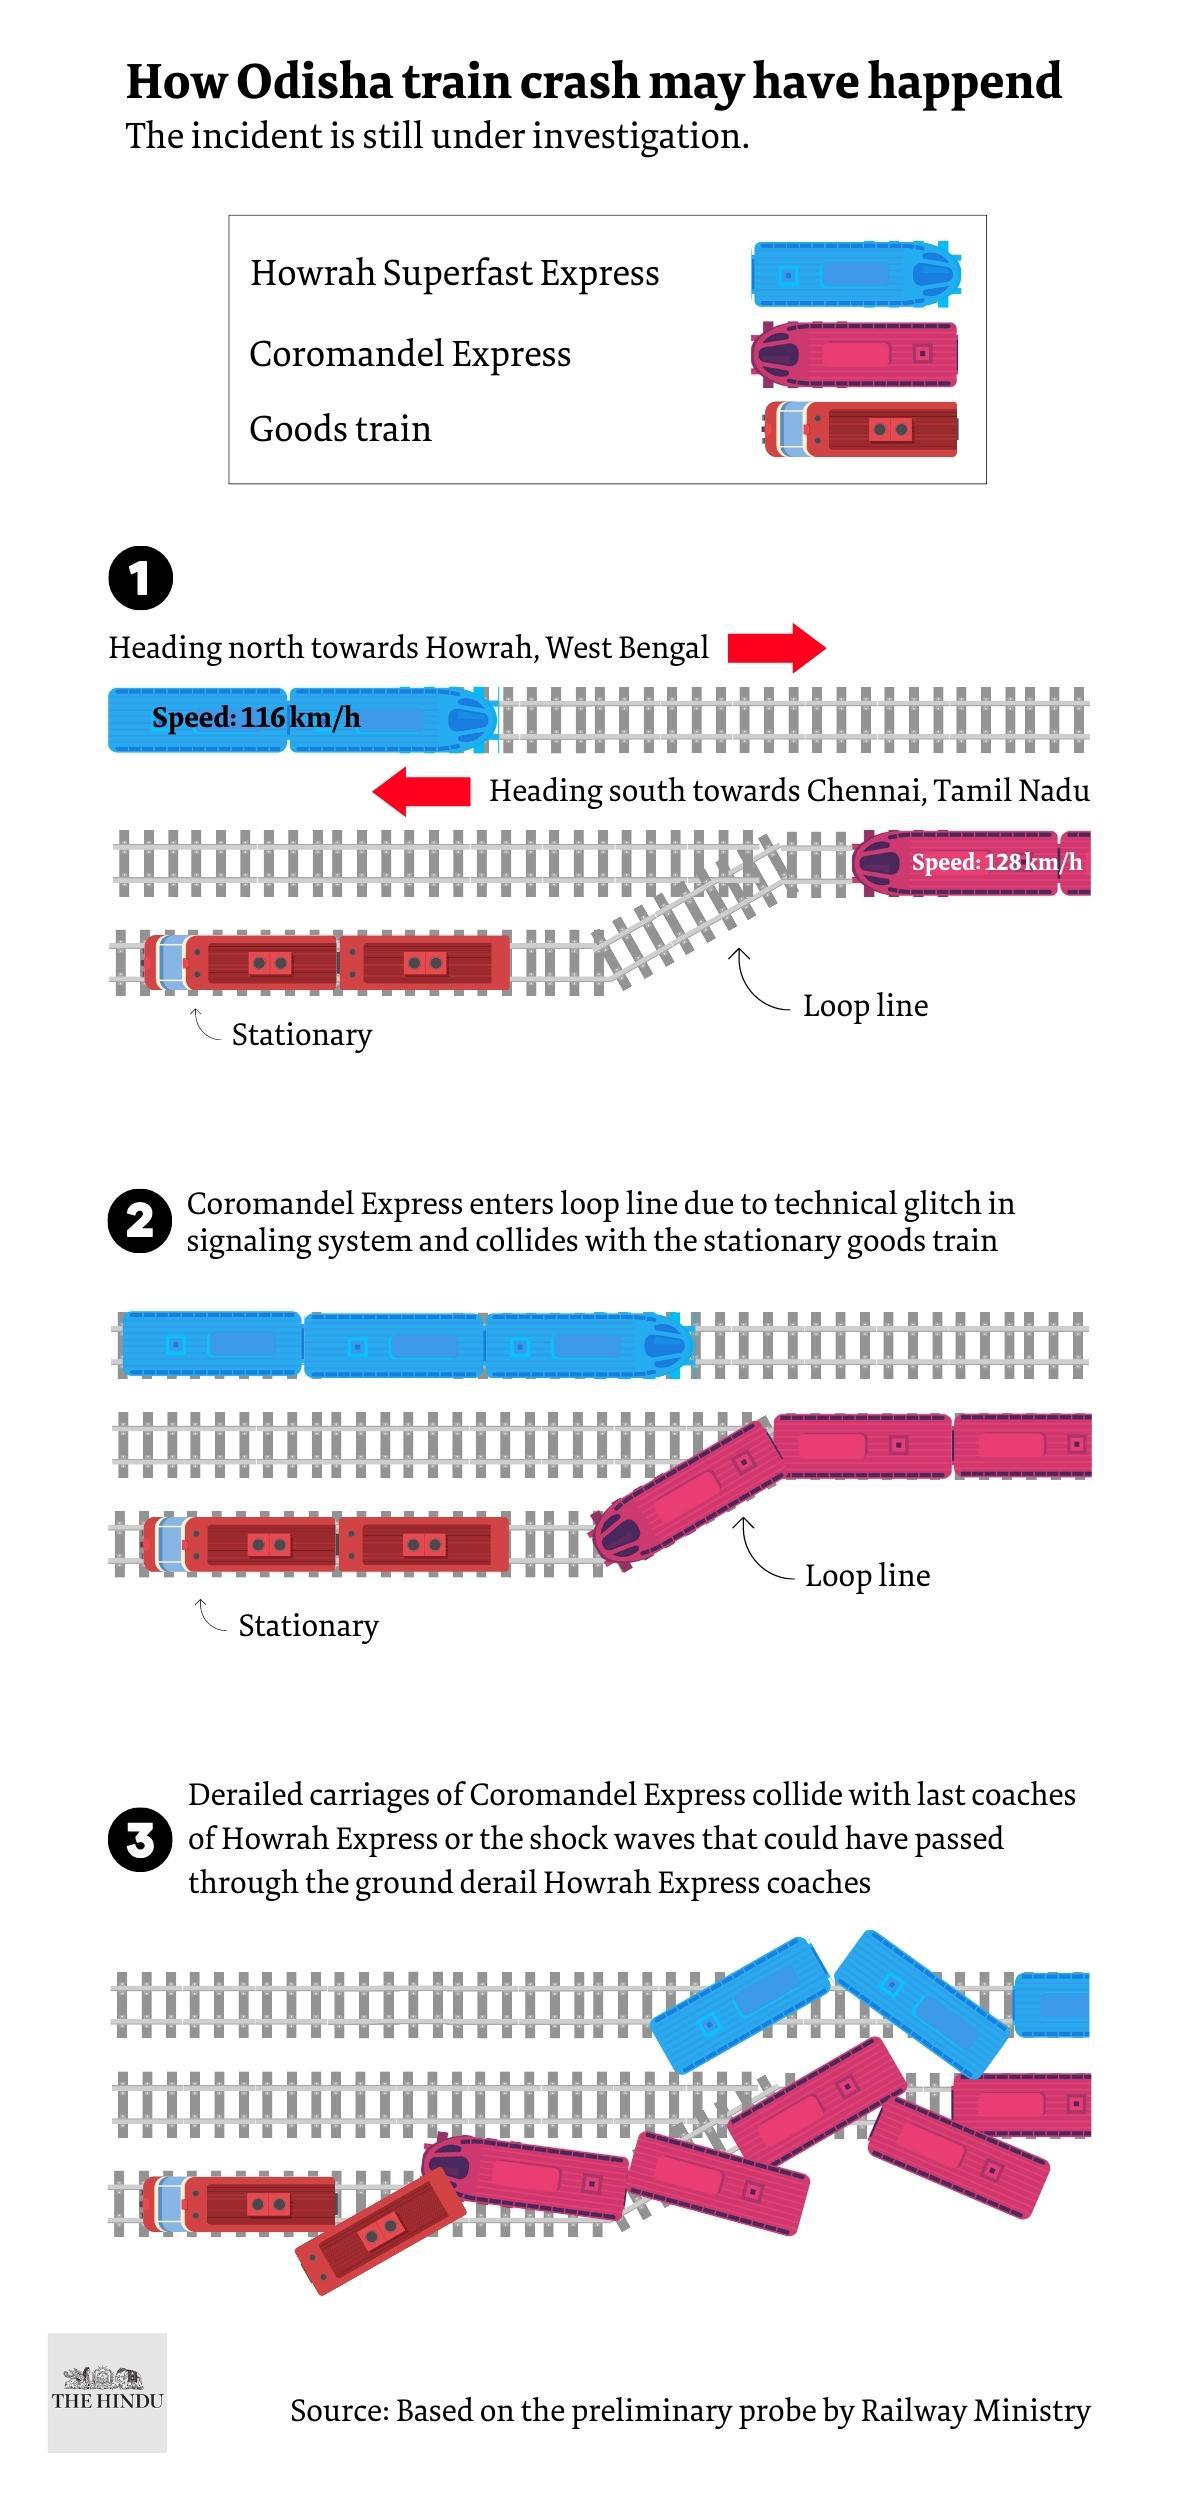 An infographic depicting how the Odisha train crash may have happened based on the preliminary probe by Indian Railway Ministry. 